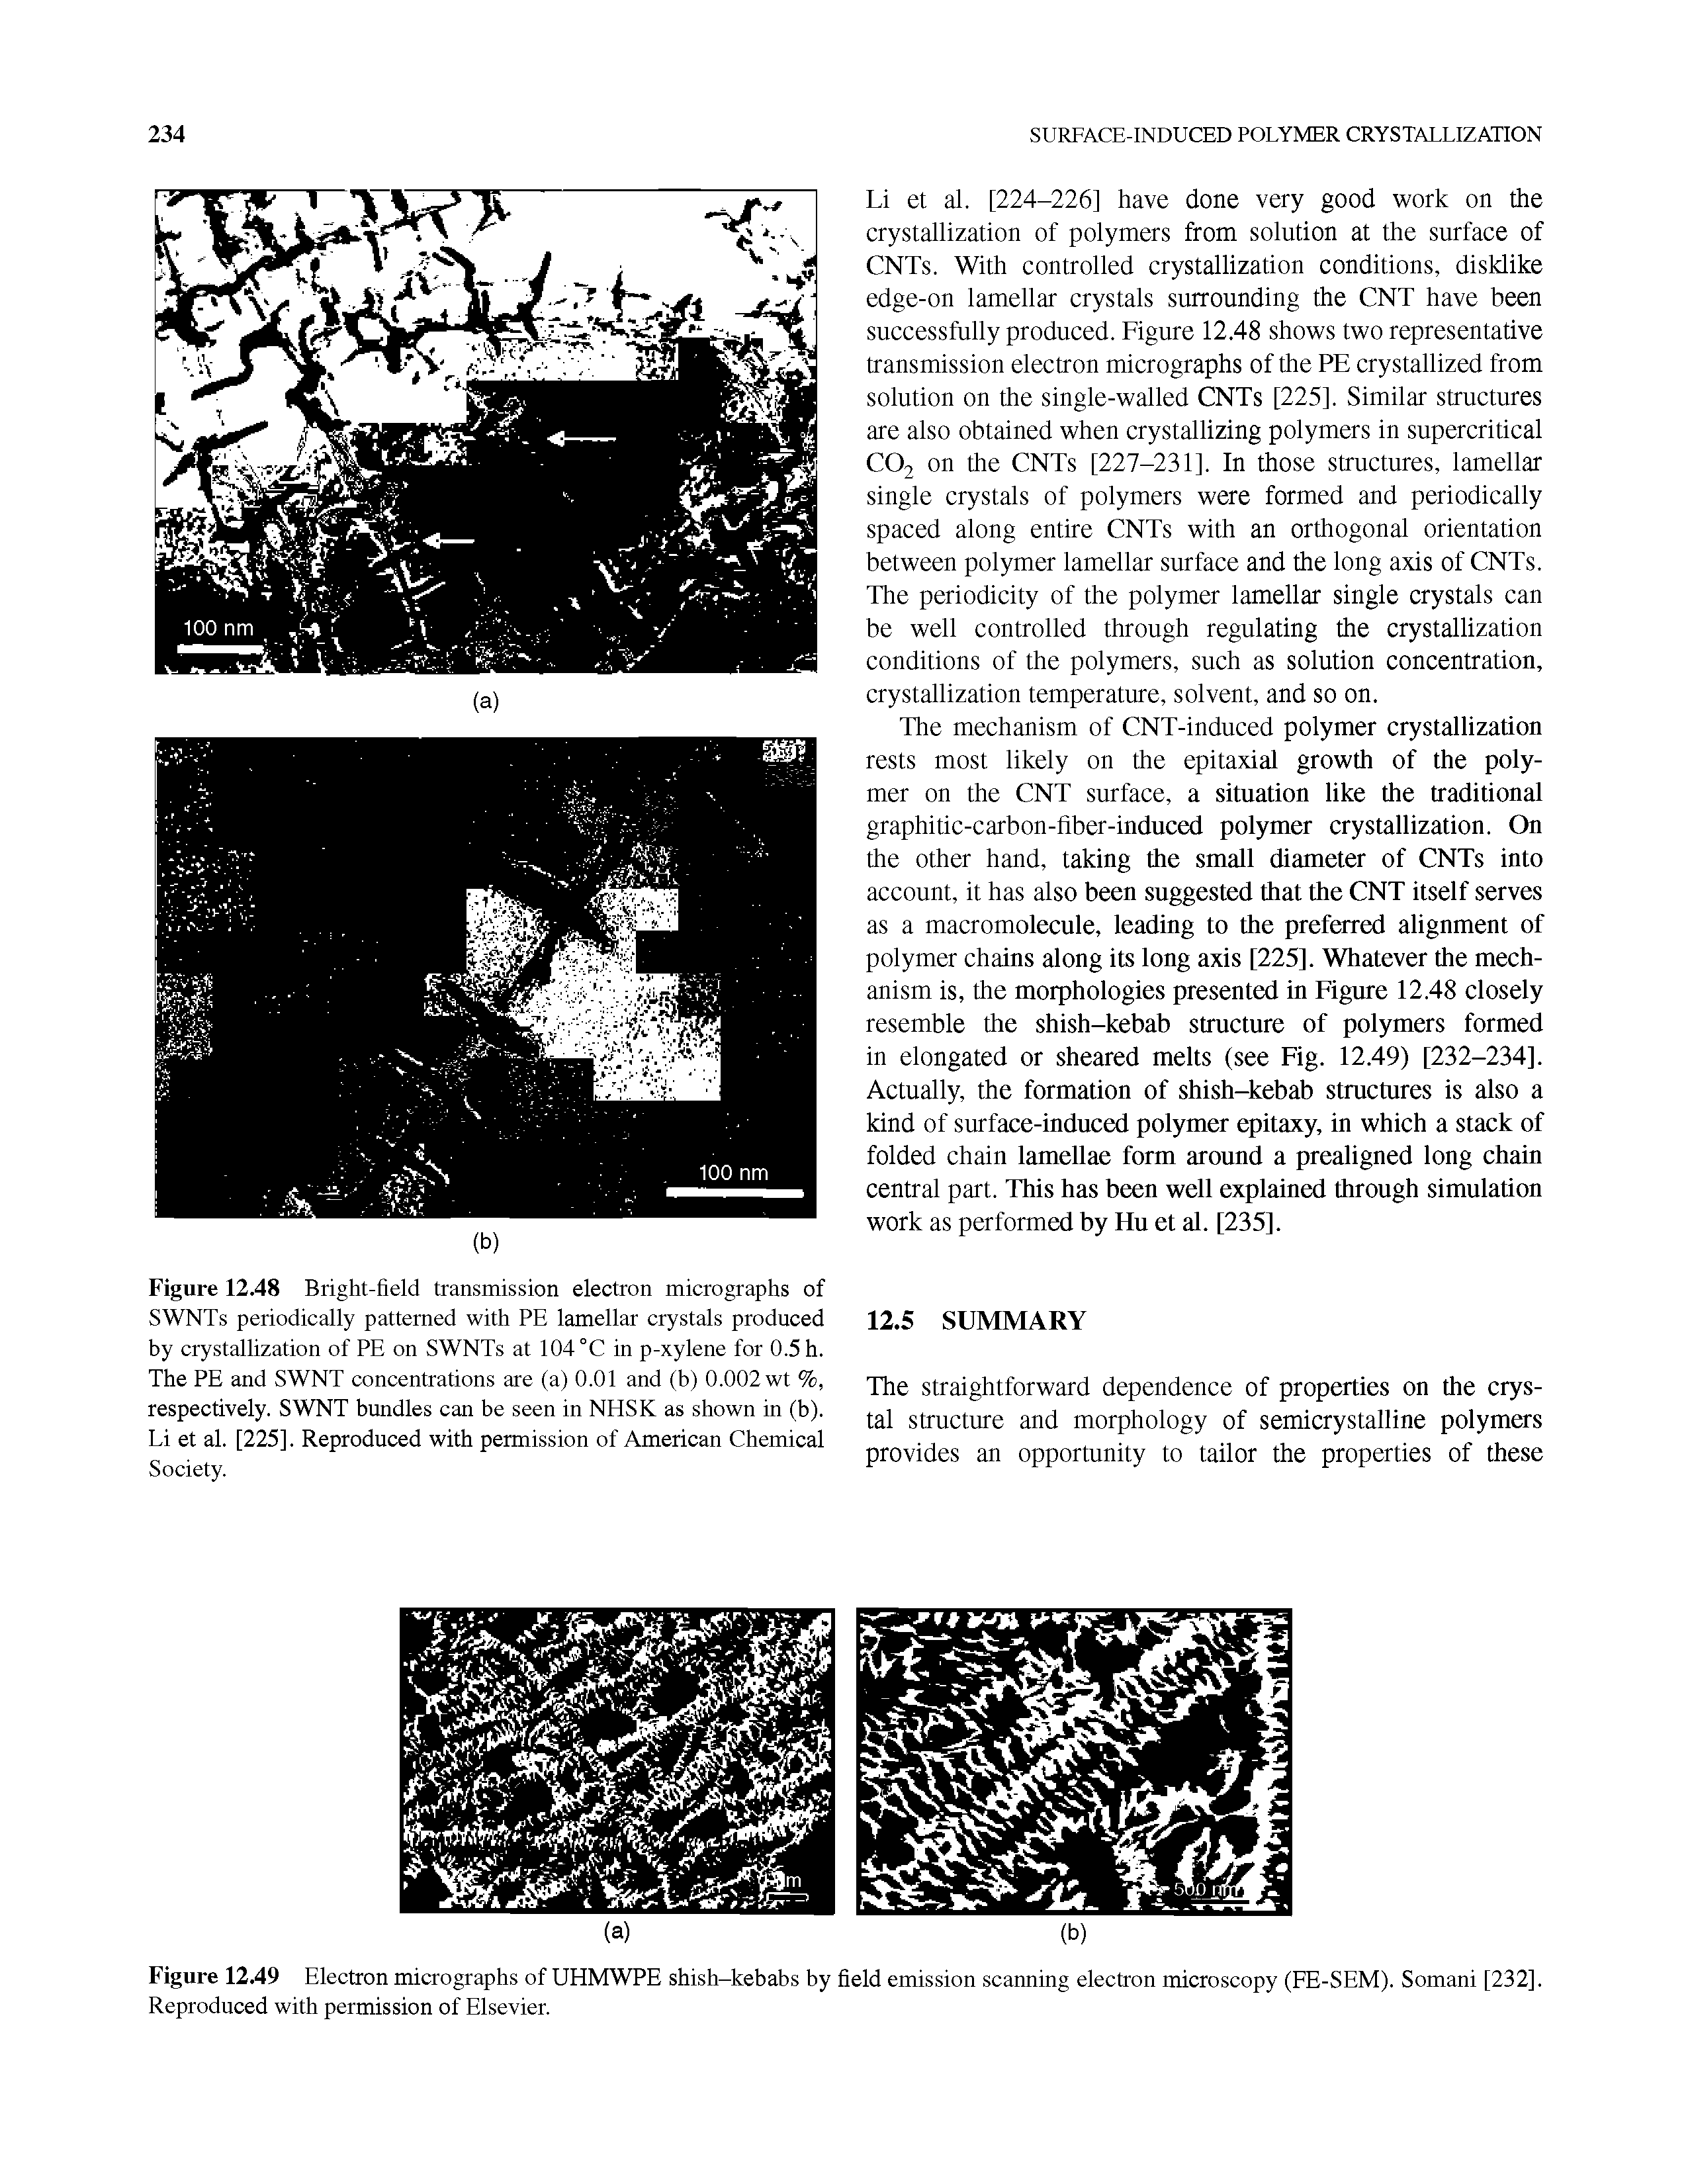 Figure 1249 Electron micrographs of UHMWPE shish-kebabs by field emission scanning electron microscopy (FE-SEM). Somani [232]. Reproduced with permission of Elsevier.